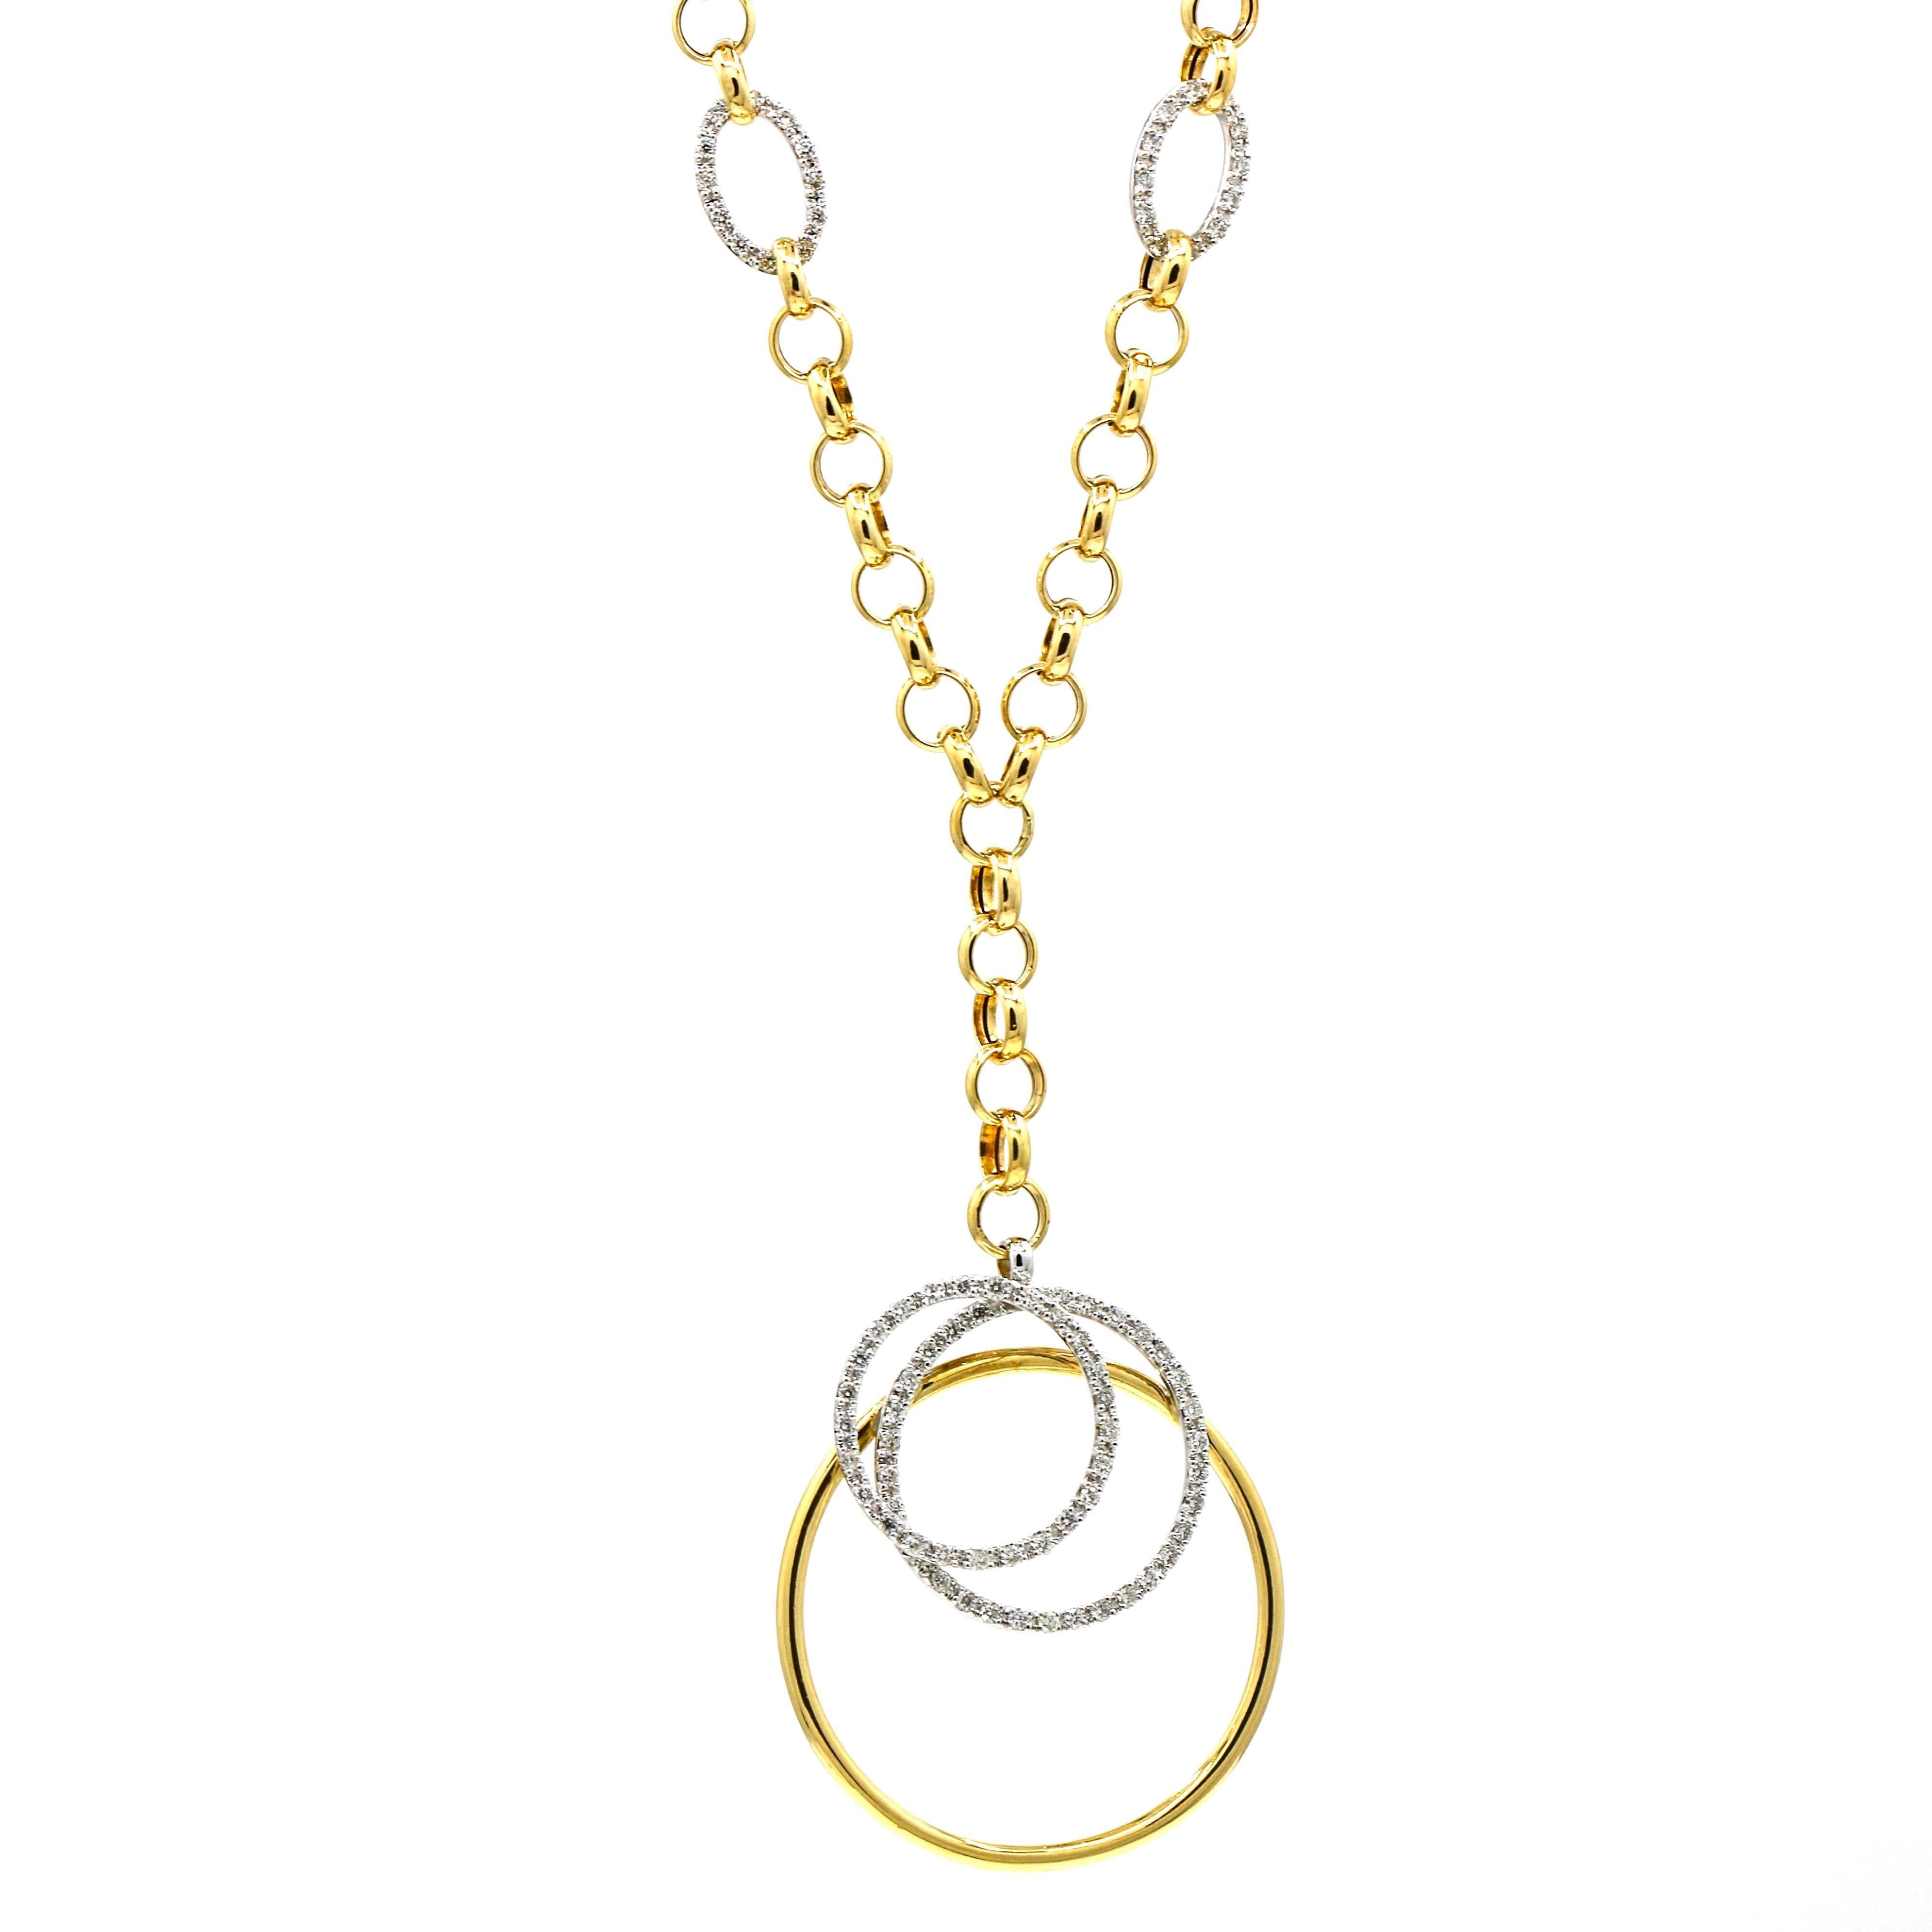 Diamond circles pendant necklace in 18-karat yellow and white gold. The chain has 4 diamond oval link stations and a drop pendant that has 3 circles, two of which are pave set with diamonds. Signed M.

Length, 18 inches
Width, 5mm
Depth, 4.5mm